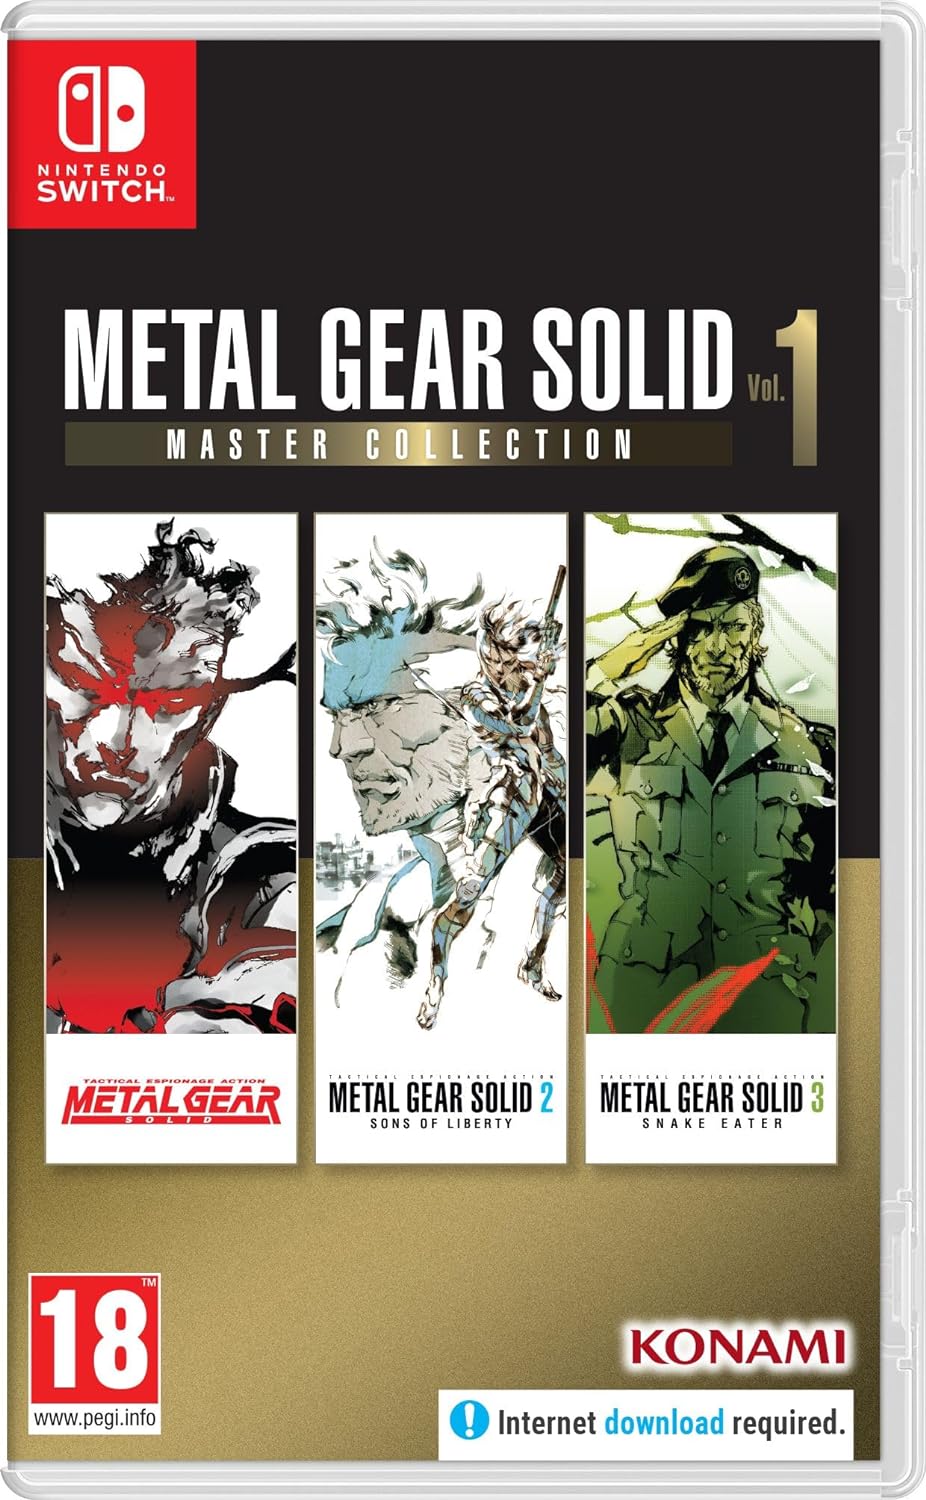 SWITCH METAL GEAR SOLID MASTER COLLECTION VOL. 1